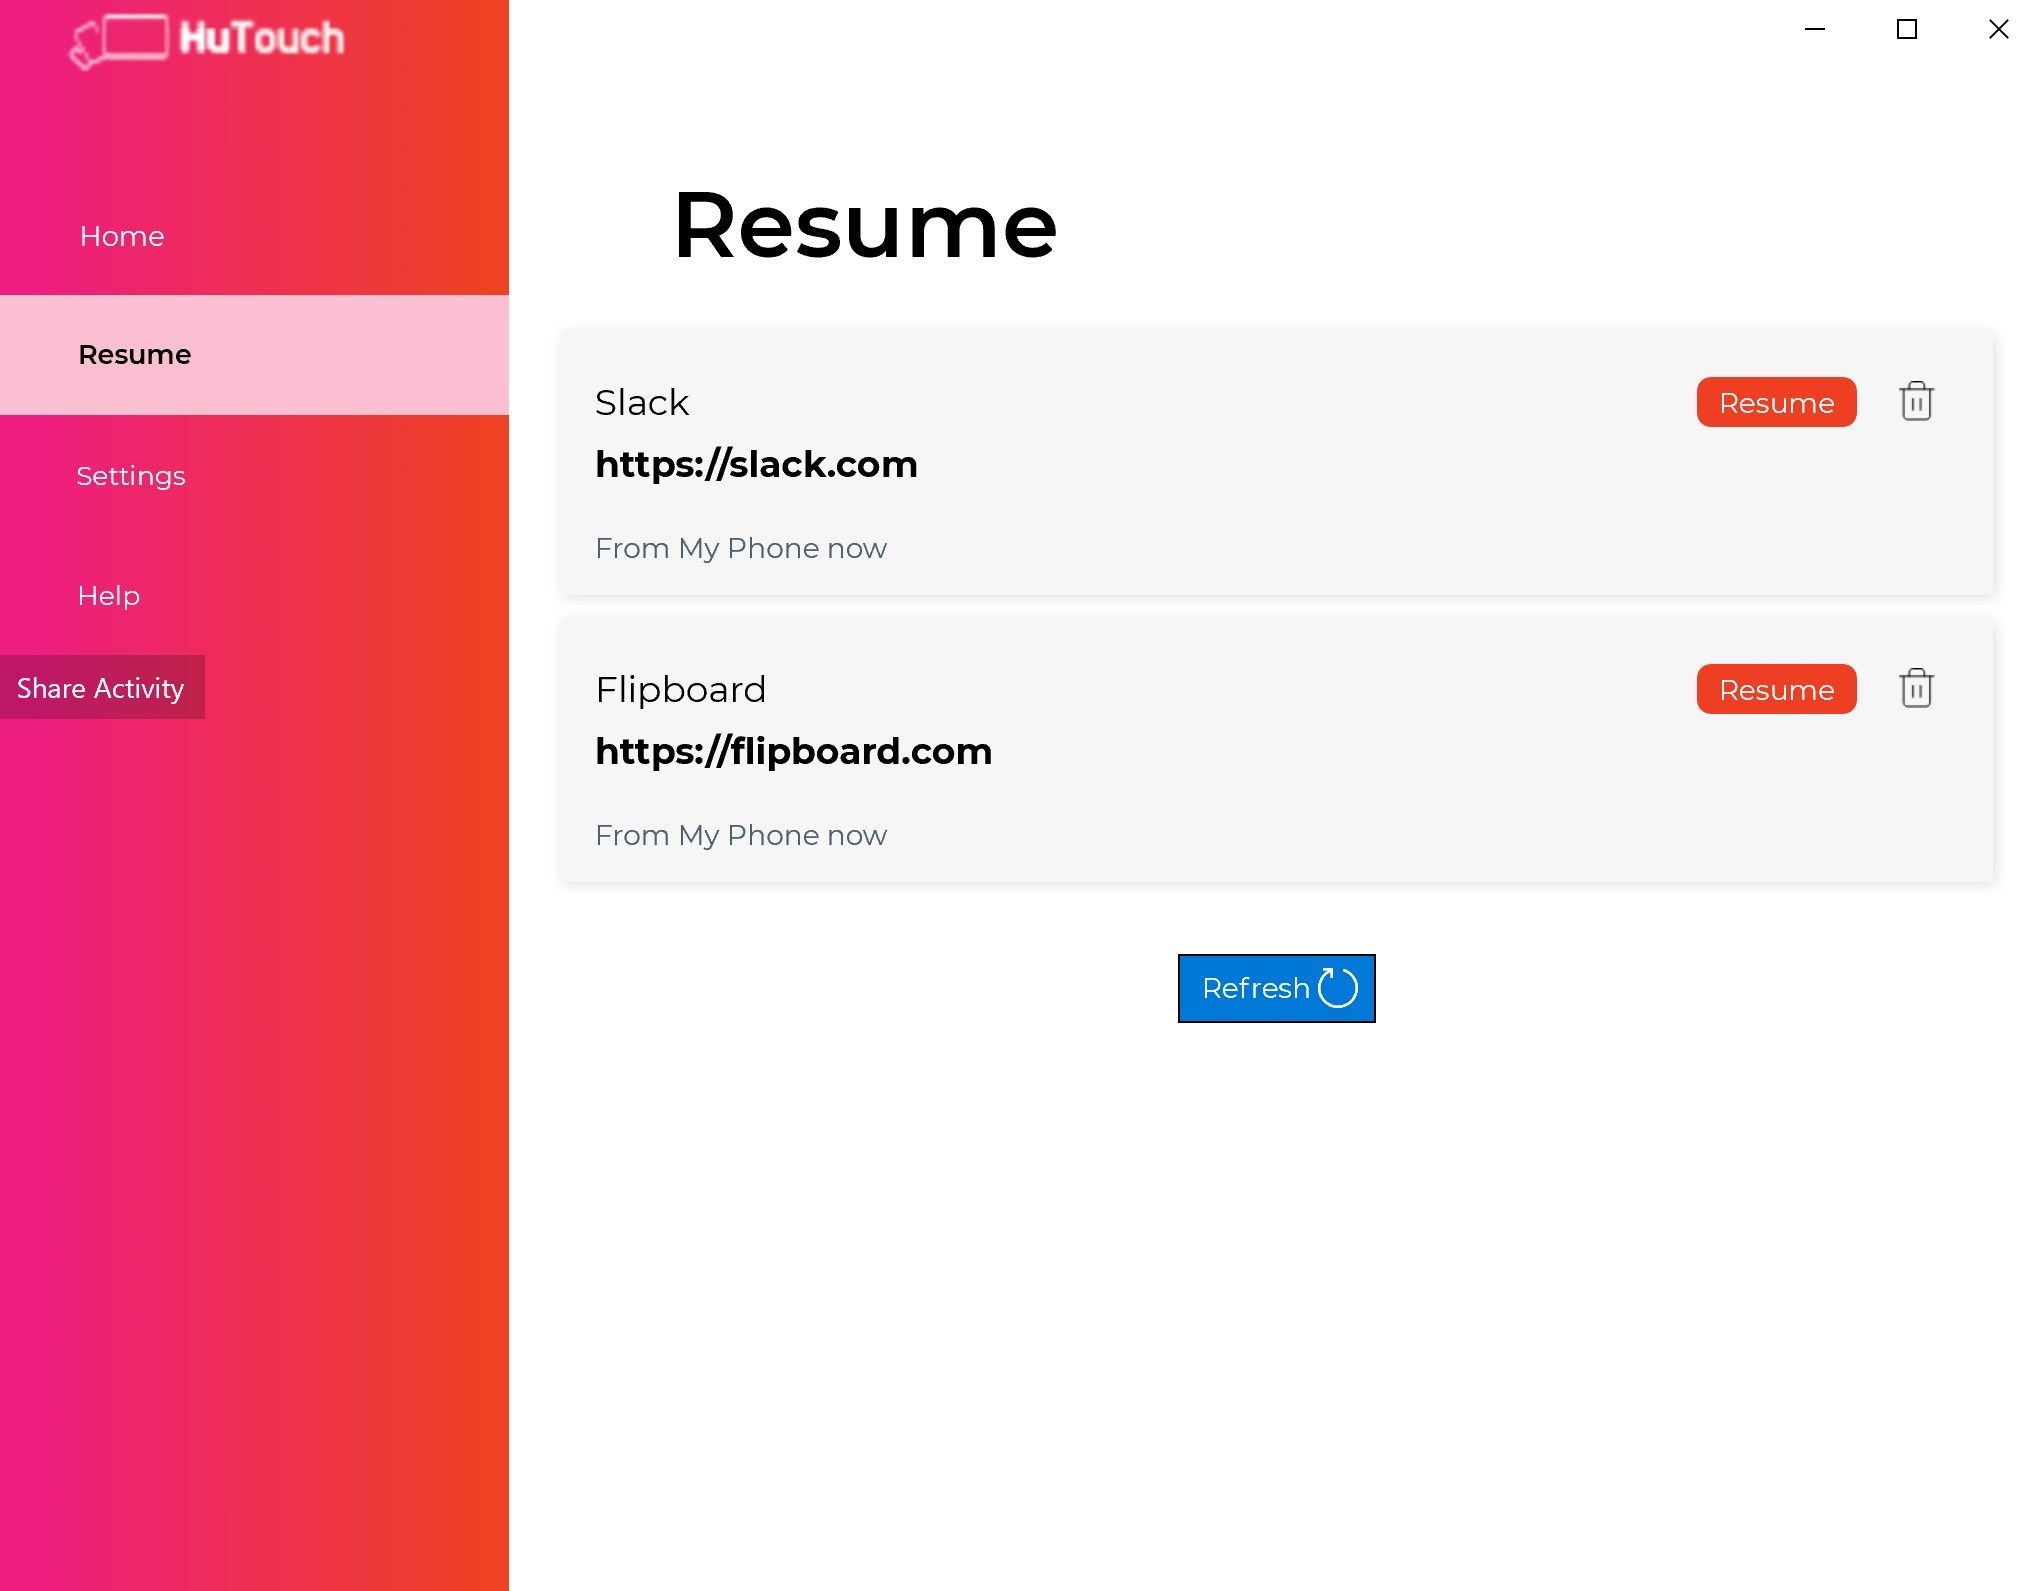 Click "Resume" to get back to your current tasks that were sent from other devices